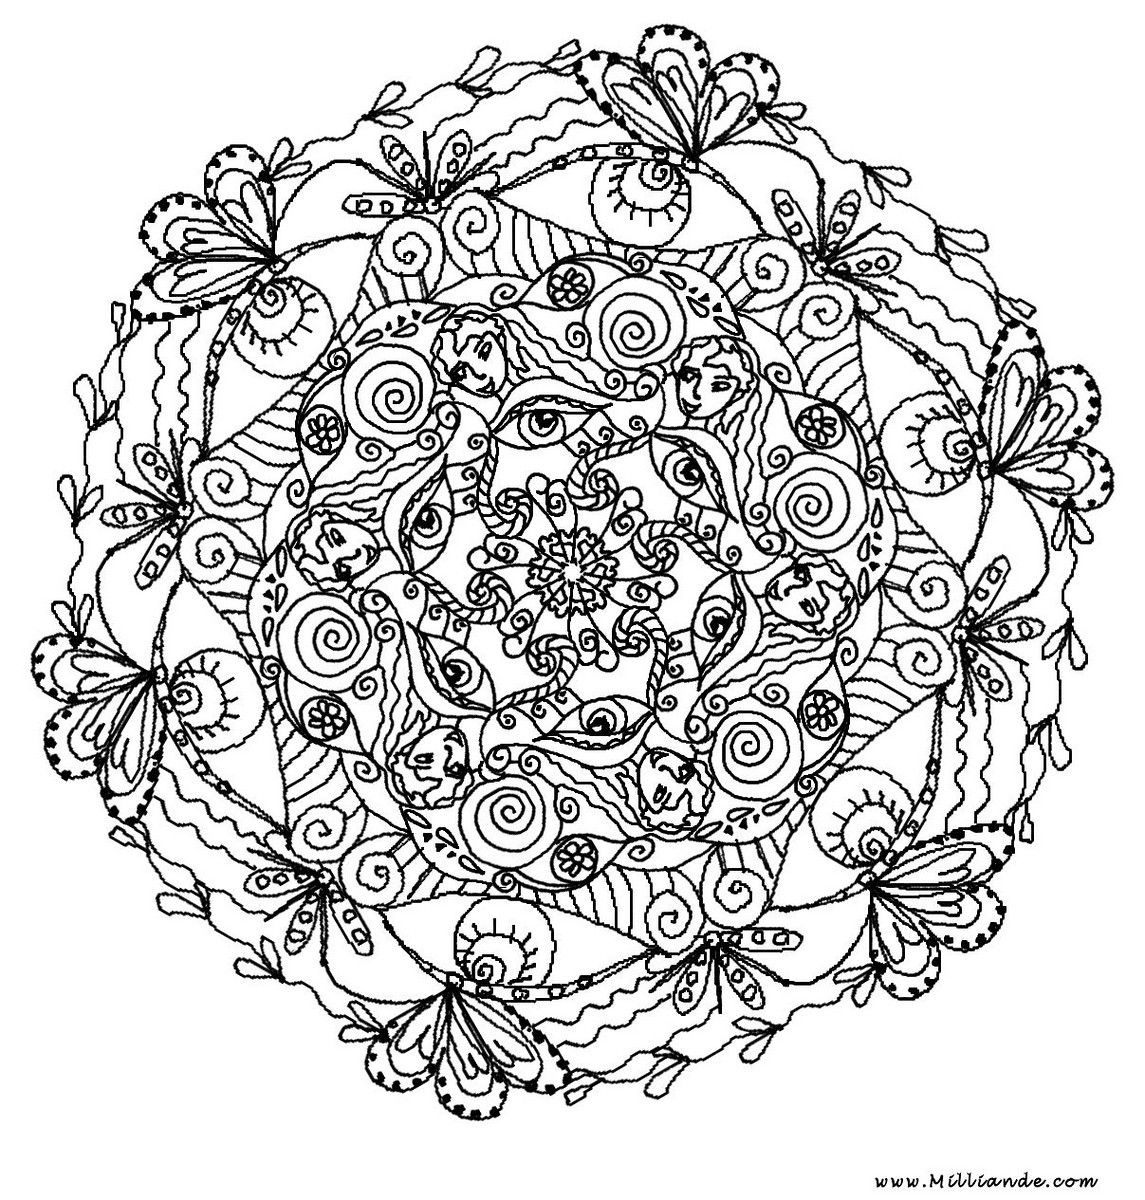 Adults Free Coloring Pages For Kids ›› Page 0 | Kids Coloring